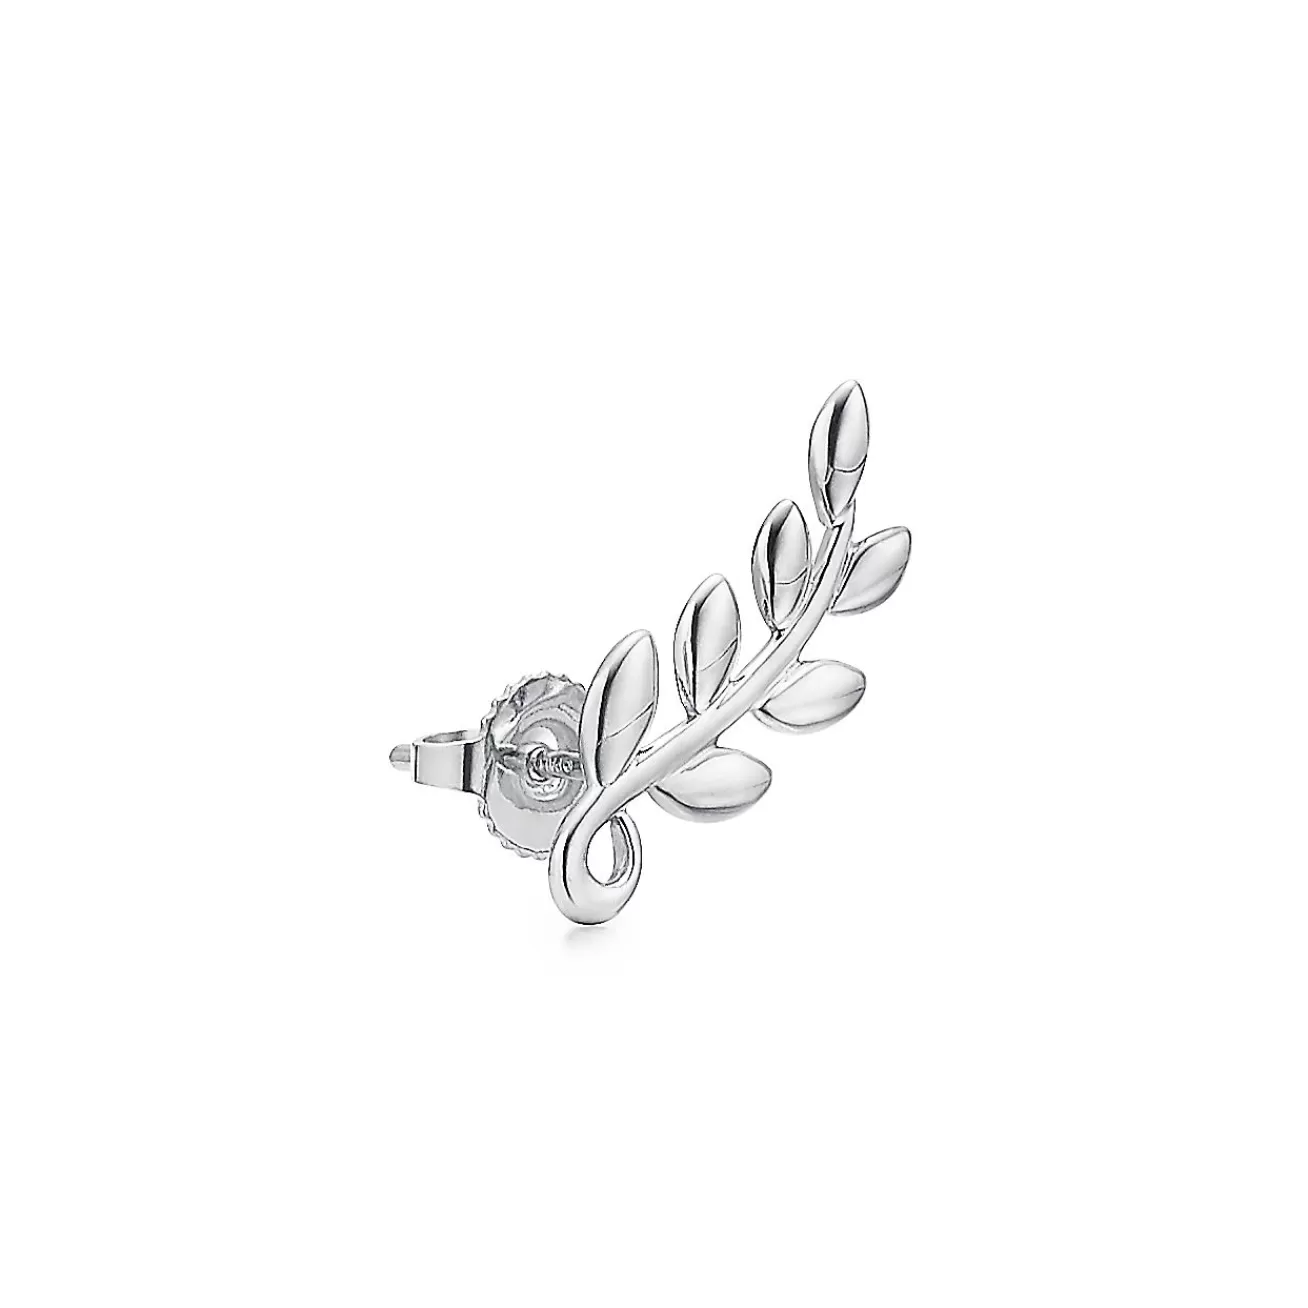 Tiffany & Co. Paloma Picasso® Olive Leaf climber earrings in sterling silver. | ^ Earrings | Gifts for Her